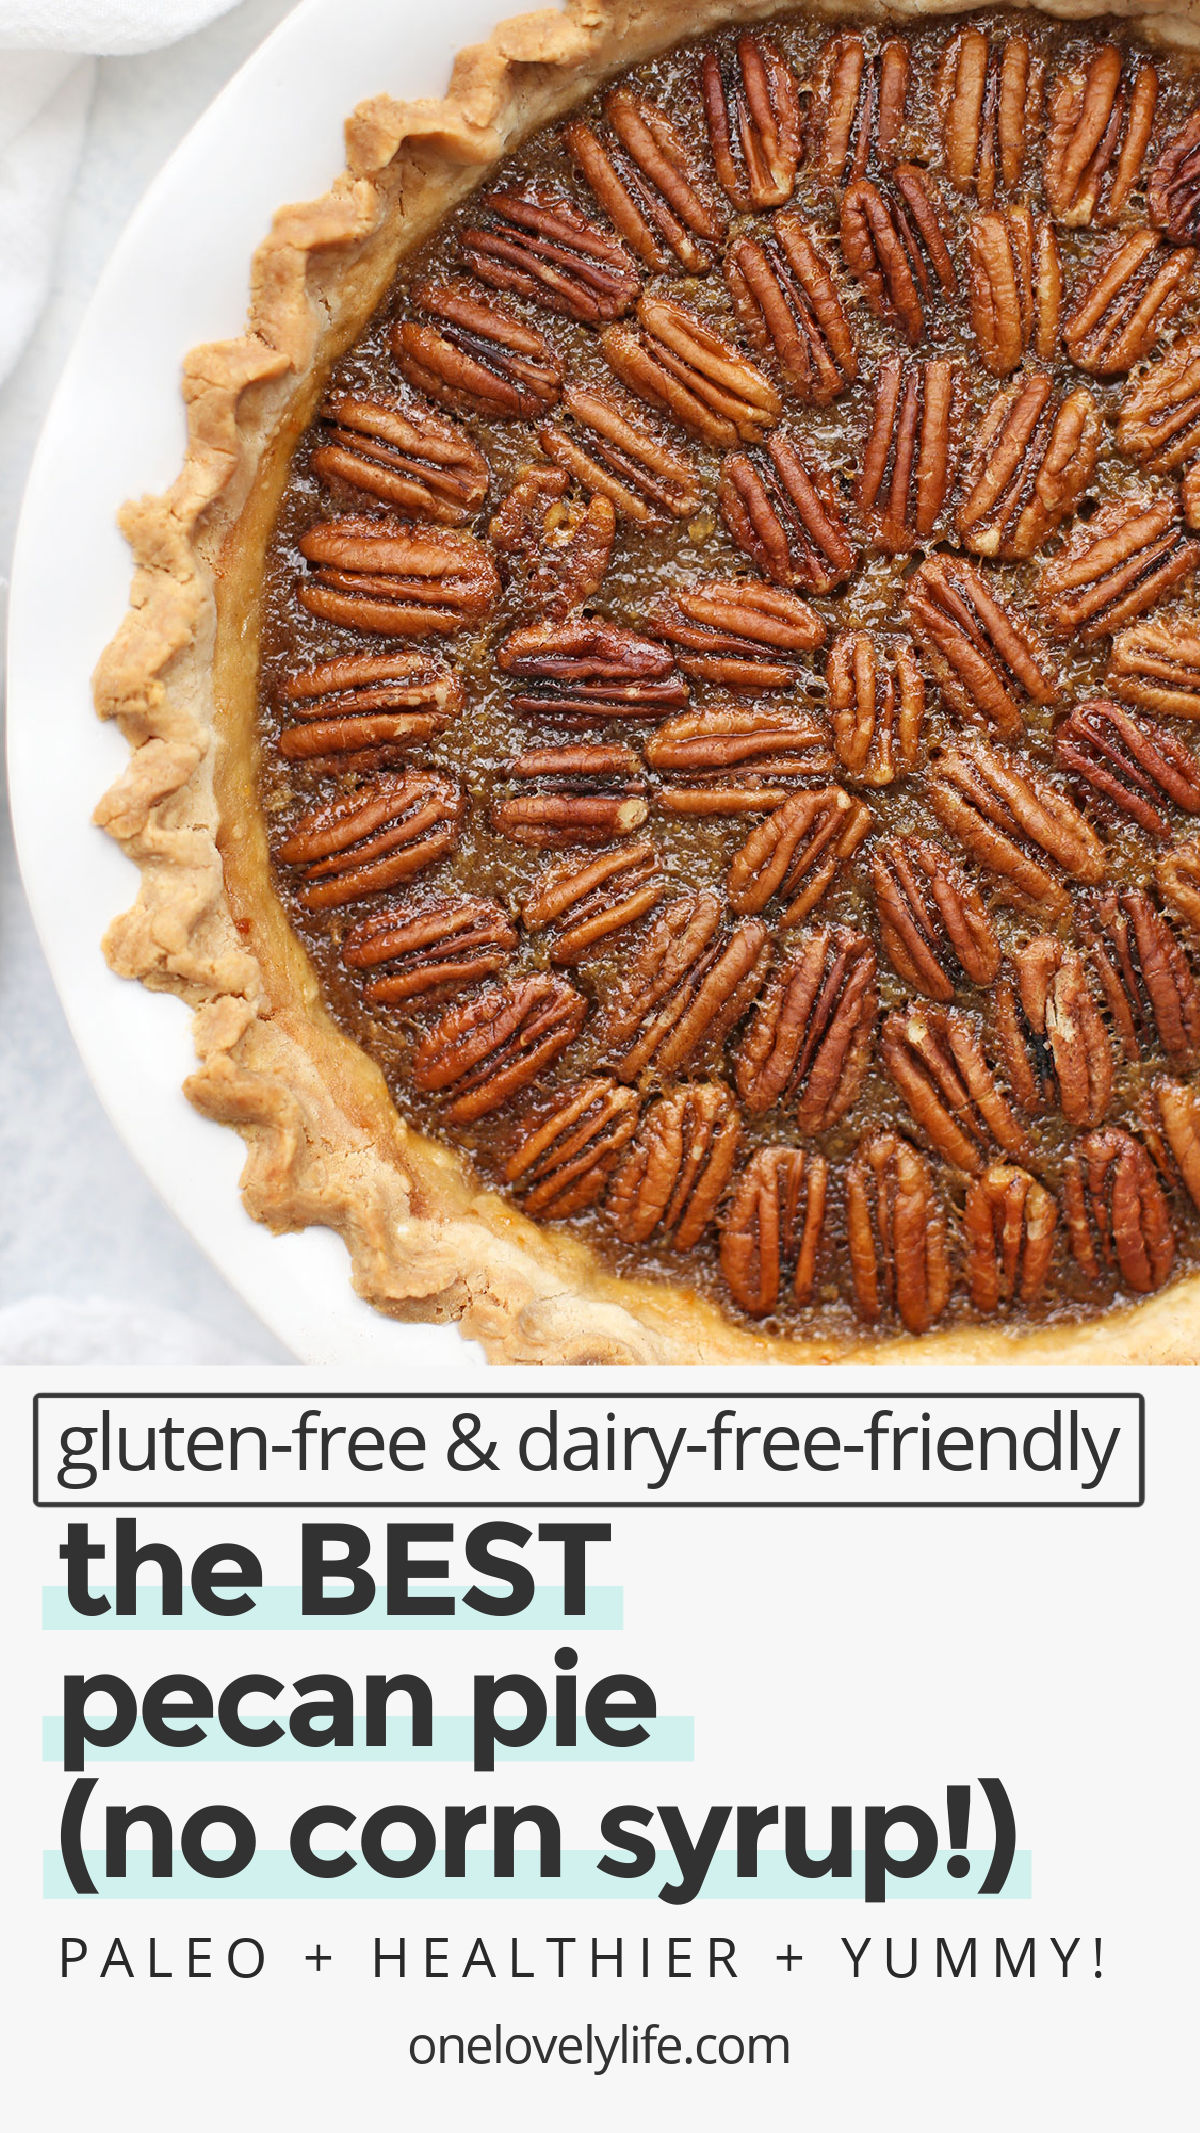 The BEST Pecan Pie Recipe - This yummy pecan pie is made without corn syrup. The filling is incredible and I love all the crust options. Gluten Free, Dairy Free & Paleo-Friendly! // paleo pecan pie // healthy pecan pie // pecan pie no corn syrup // no corn syrup pecan pie // pecan pie // paleo thanksgiving // gluten free thanksgiving // thanksgiving pie